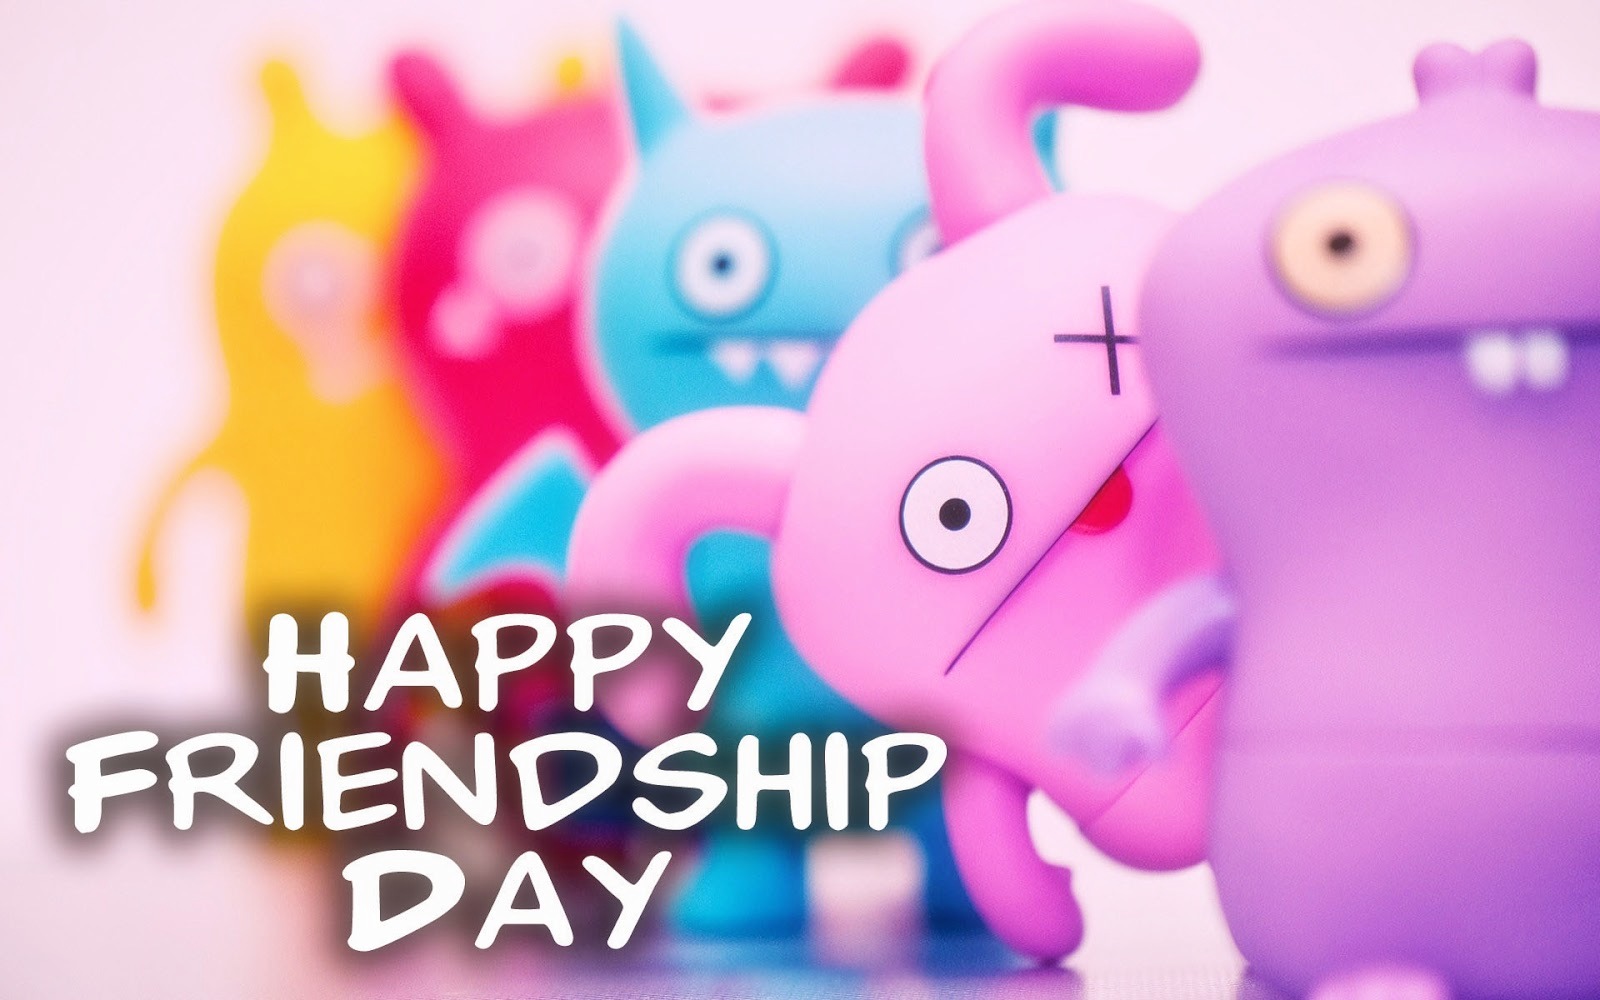 Friendship Day Whatsapp Dp Images - Happy Friendship Day Images Download Hd - HD Wallpaper 